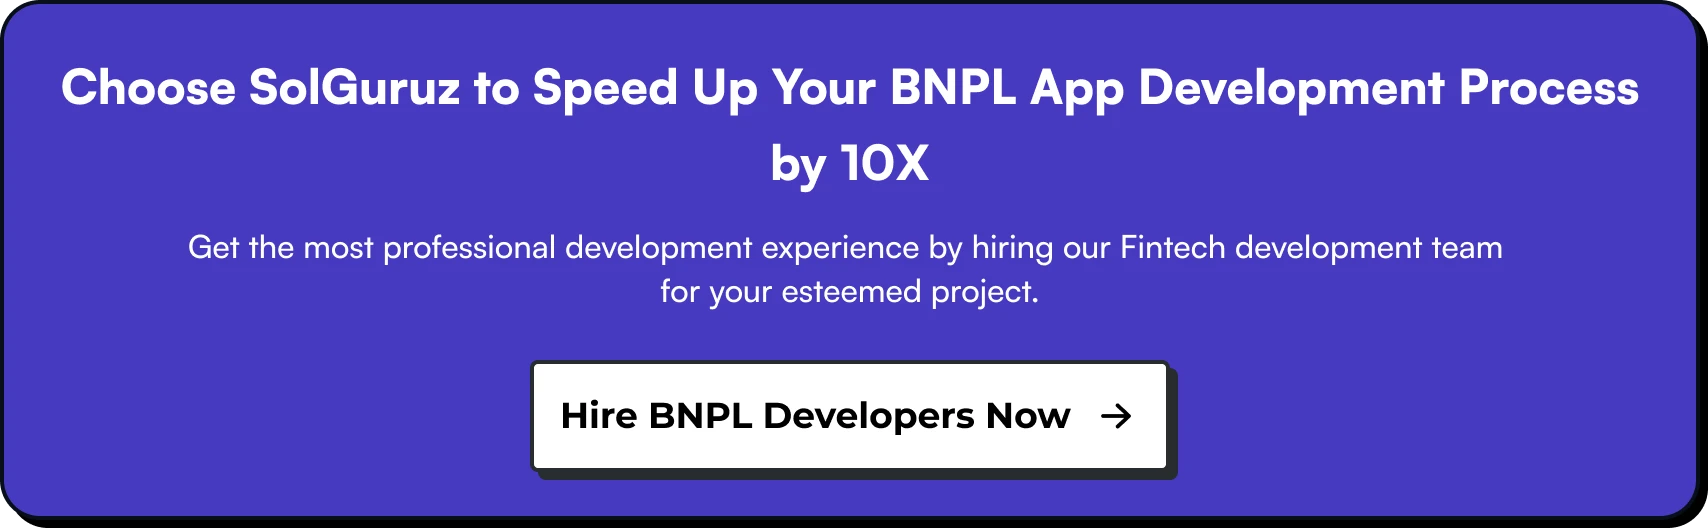 Choose SolGuruz to Speed Up Your Development Process by 10X. Get the most professional development experience by hiring our Fintech development team for your esteemed project. Hire BNPL Developers Now!